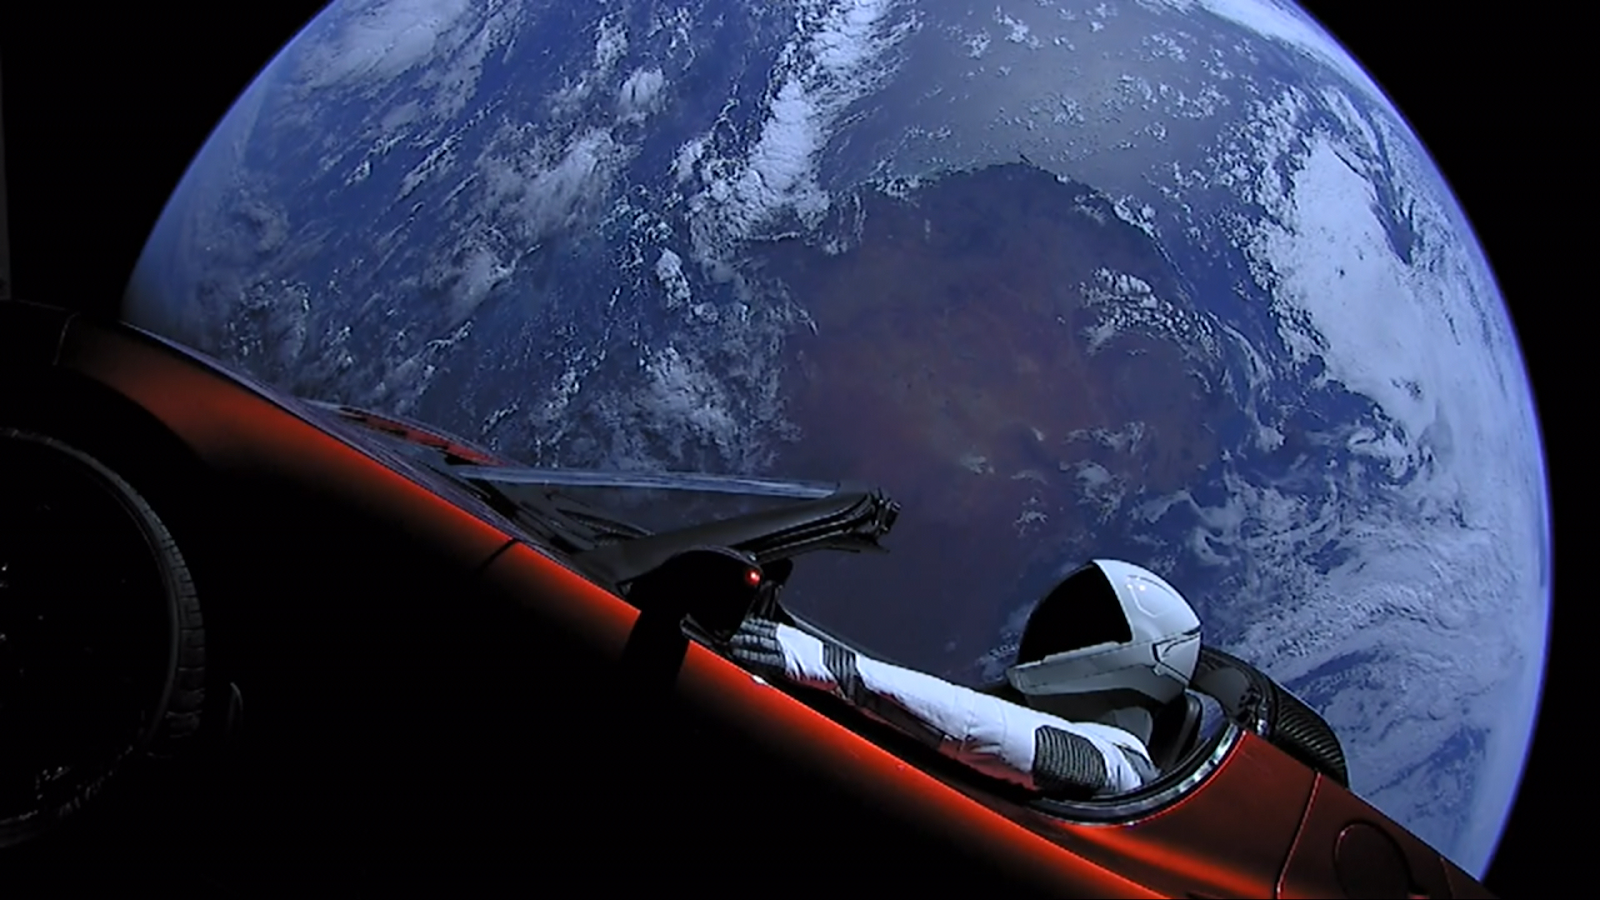 Photograph of a Tesla being driven by a SpaceX spacesuit above planet earth